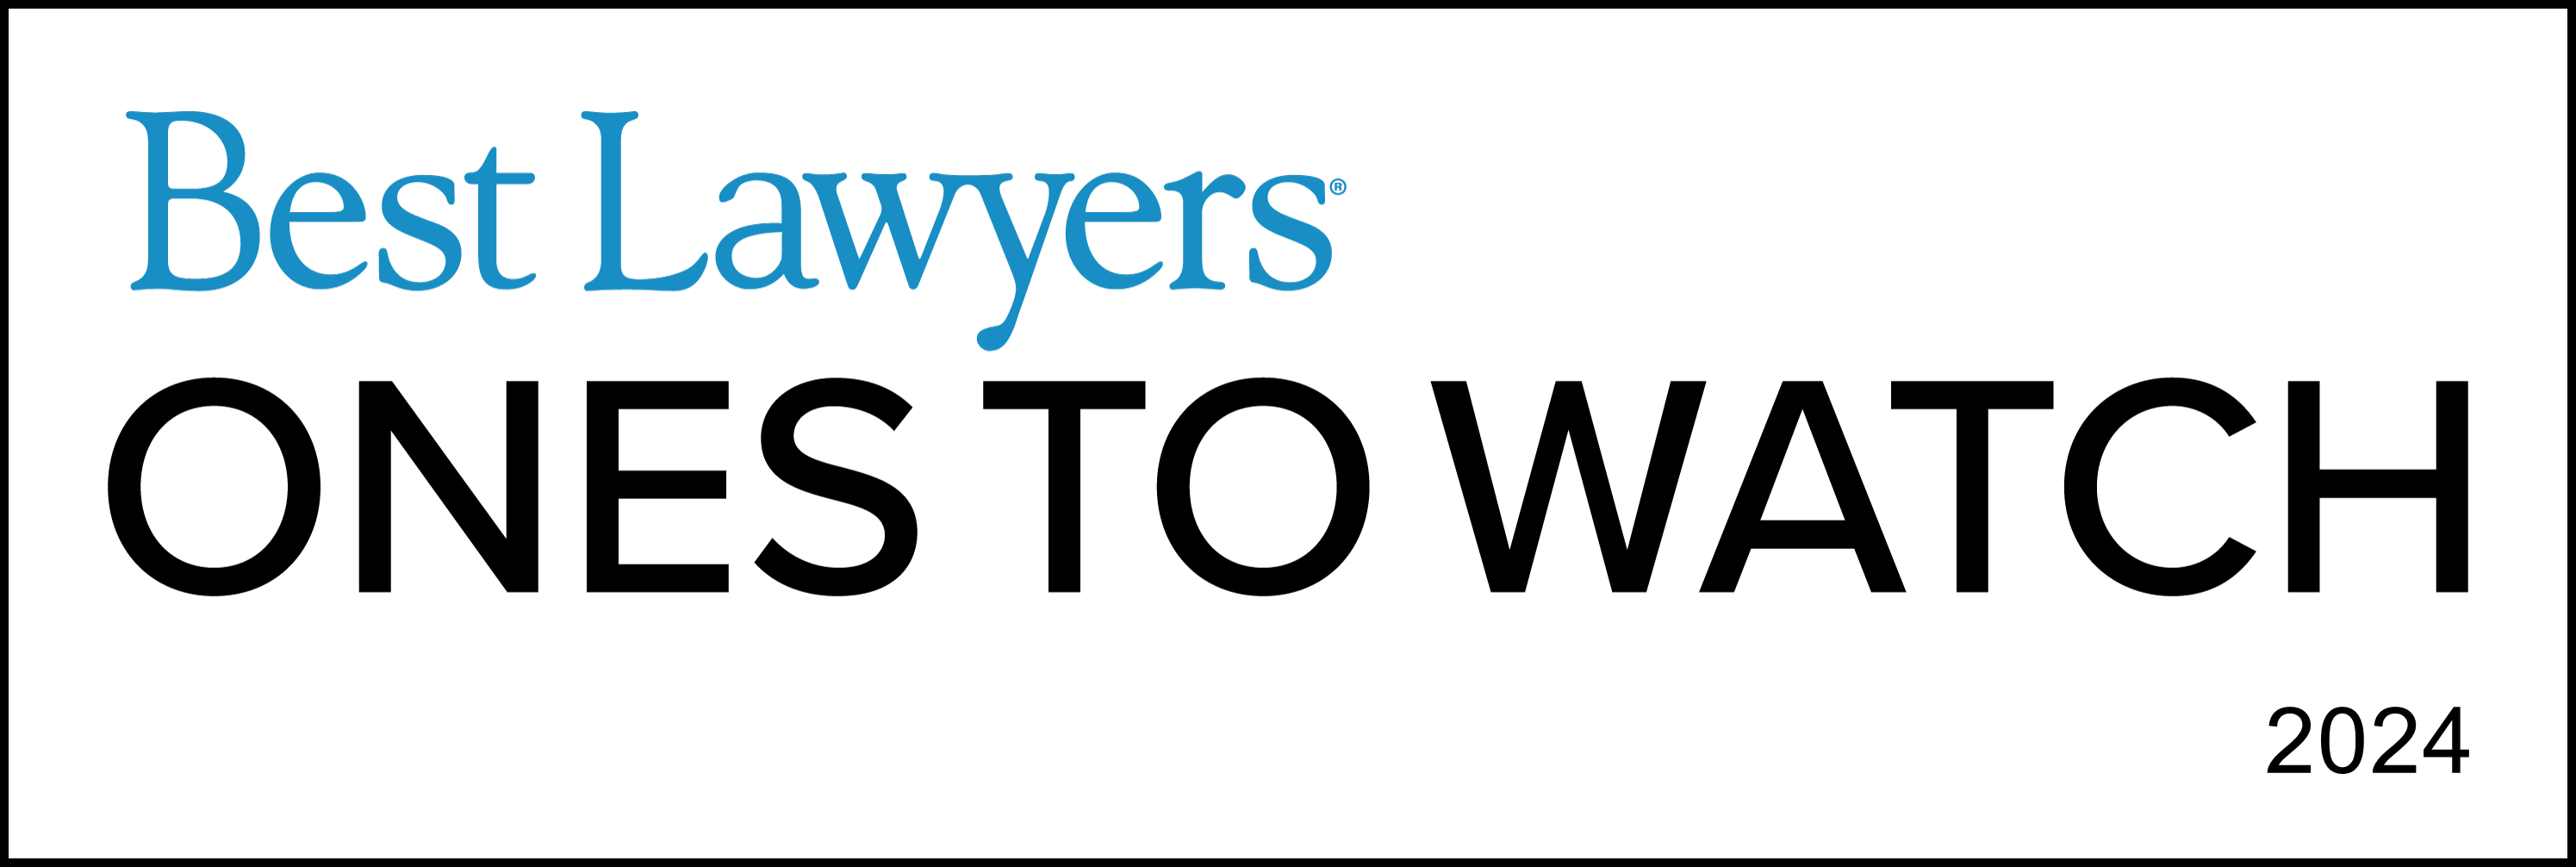 Best Lawyers Ones To Watch - 2024